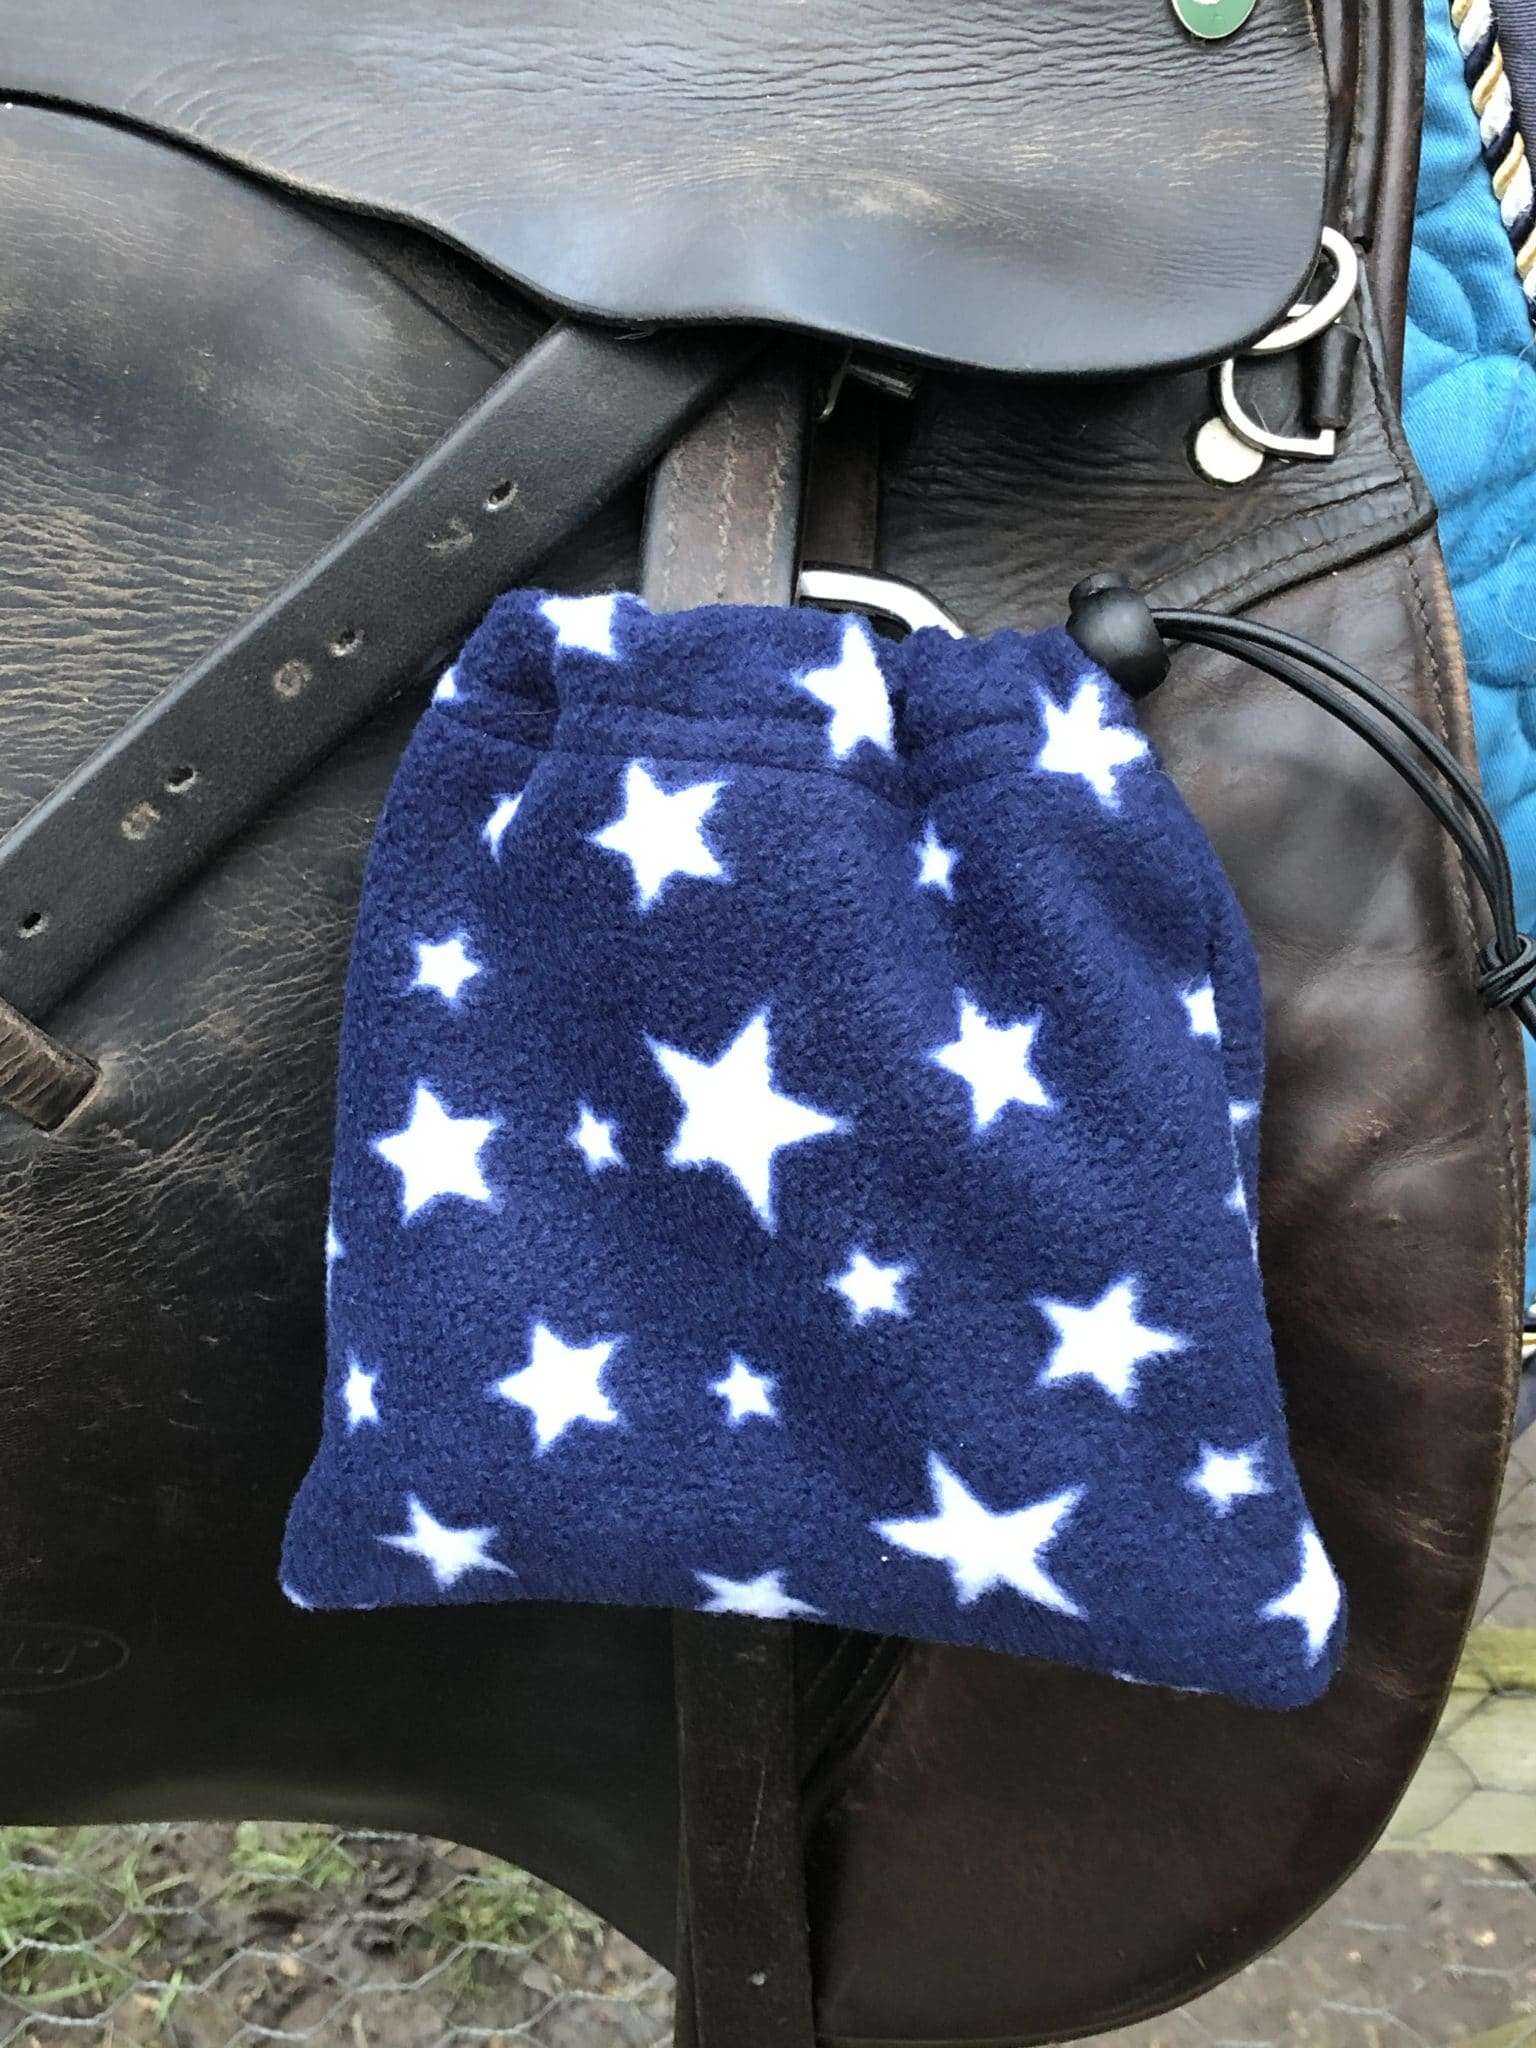 IMG 3679 scaled Fleece Stirrup Covers - Stars Help protect your saddle from dirt and scratches from the stirrups. Approx 7x7 inches Items posted within 1-3 working days. Shipped using Royal Mail 2nd Class. Back orders allow an extra 7 - 8 working days.